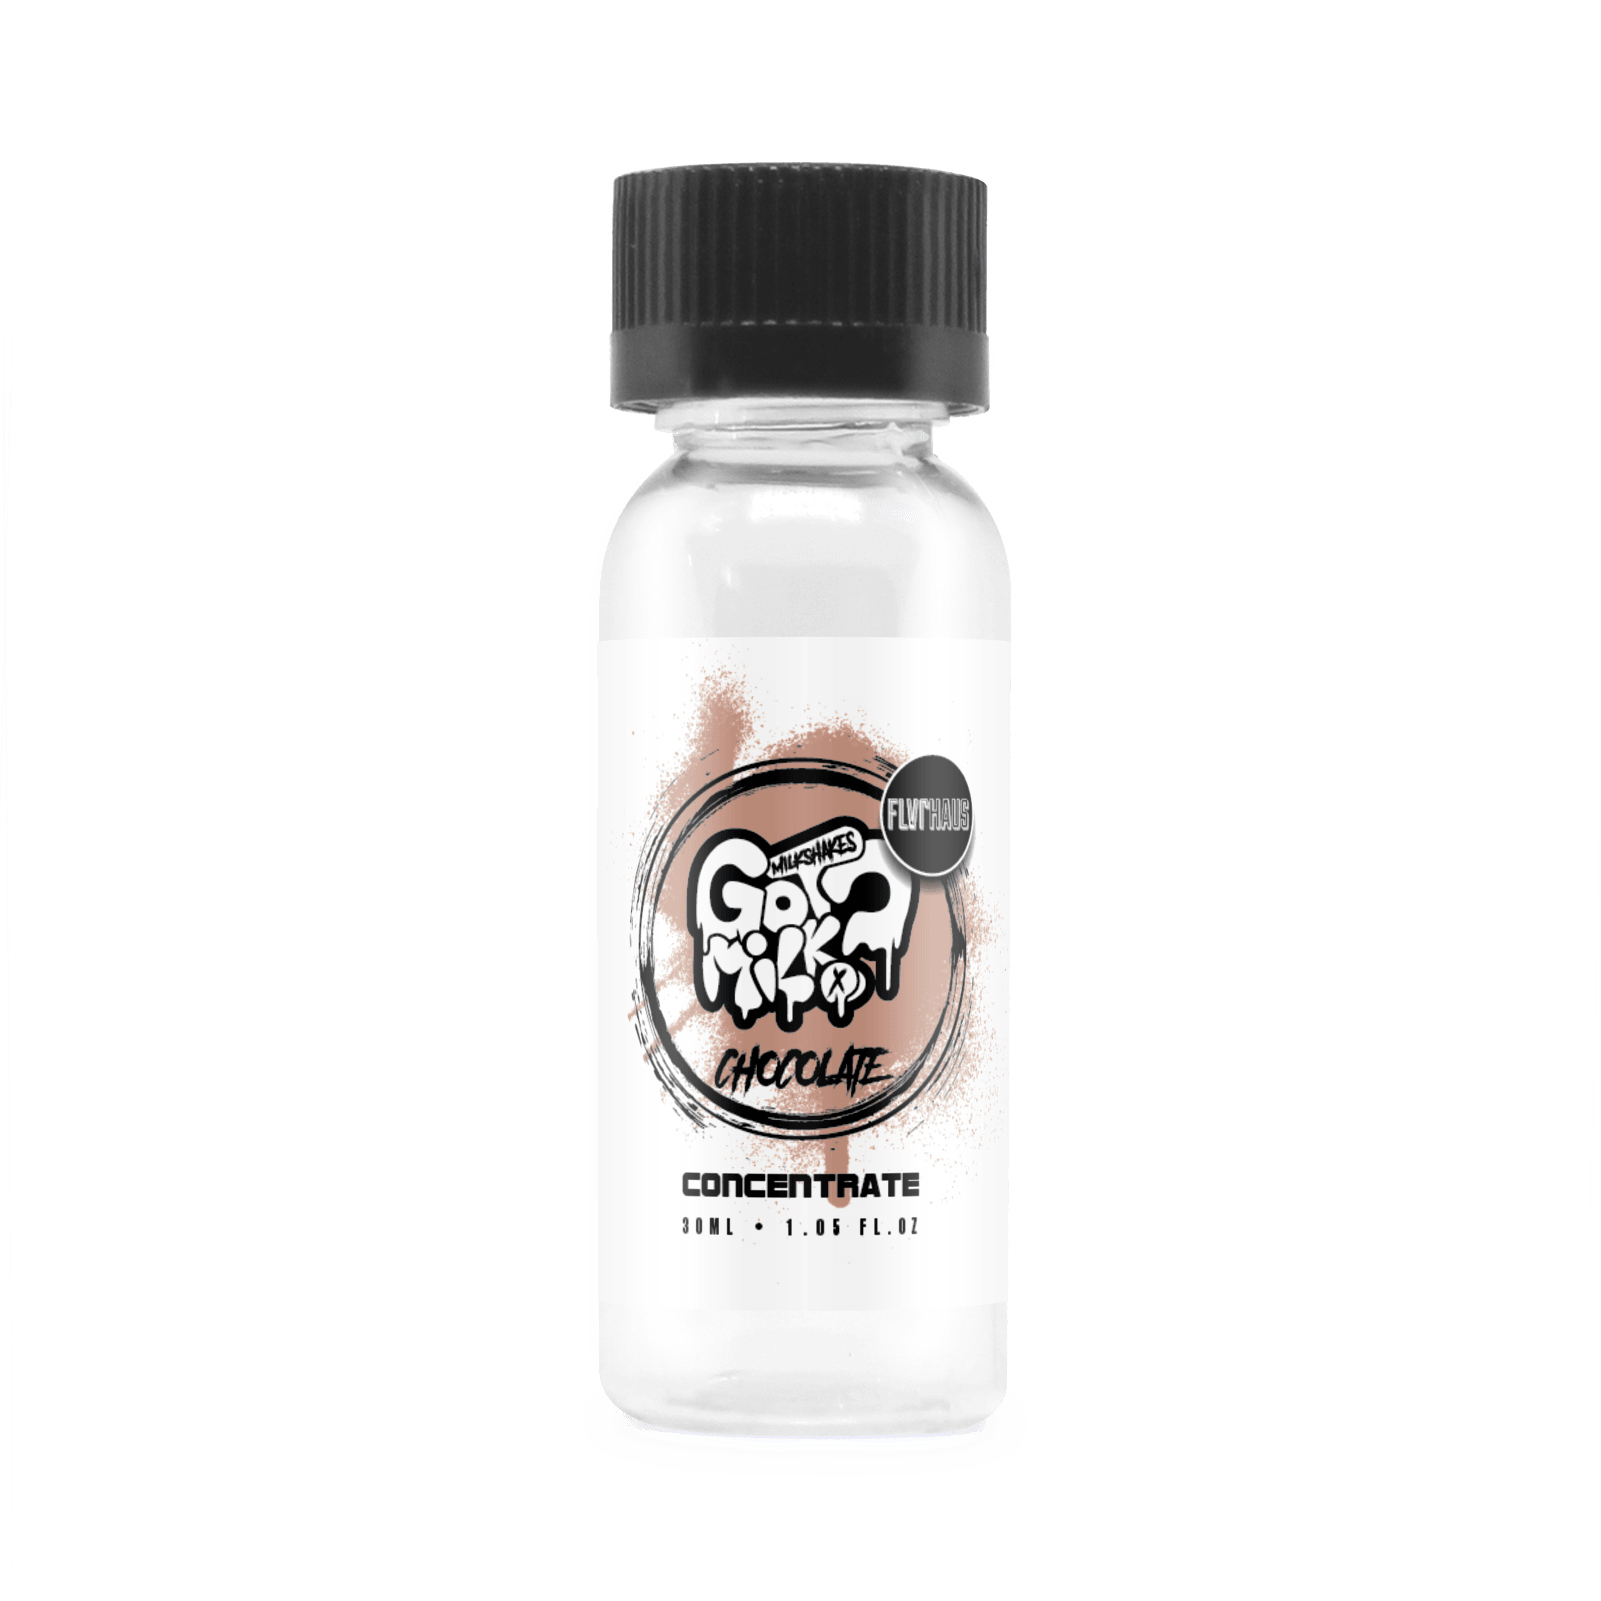 Got Milk? - Chocolate 30ml Concentrate by FLVRHAUS - The Ace Of Vapez